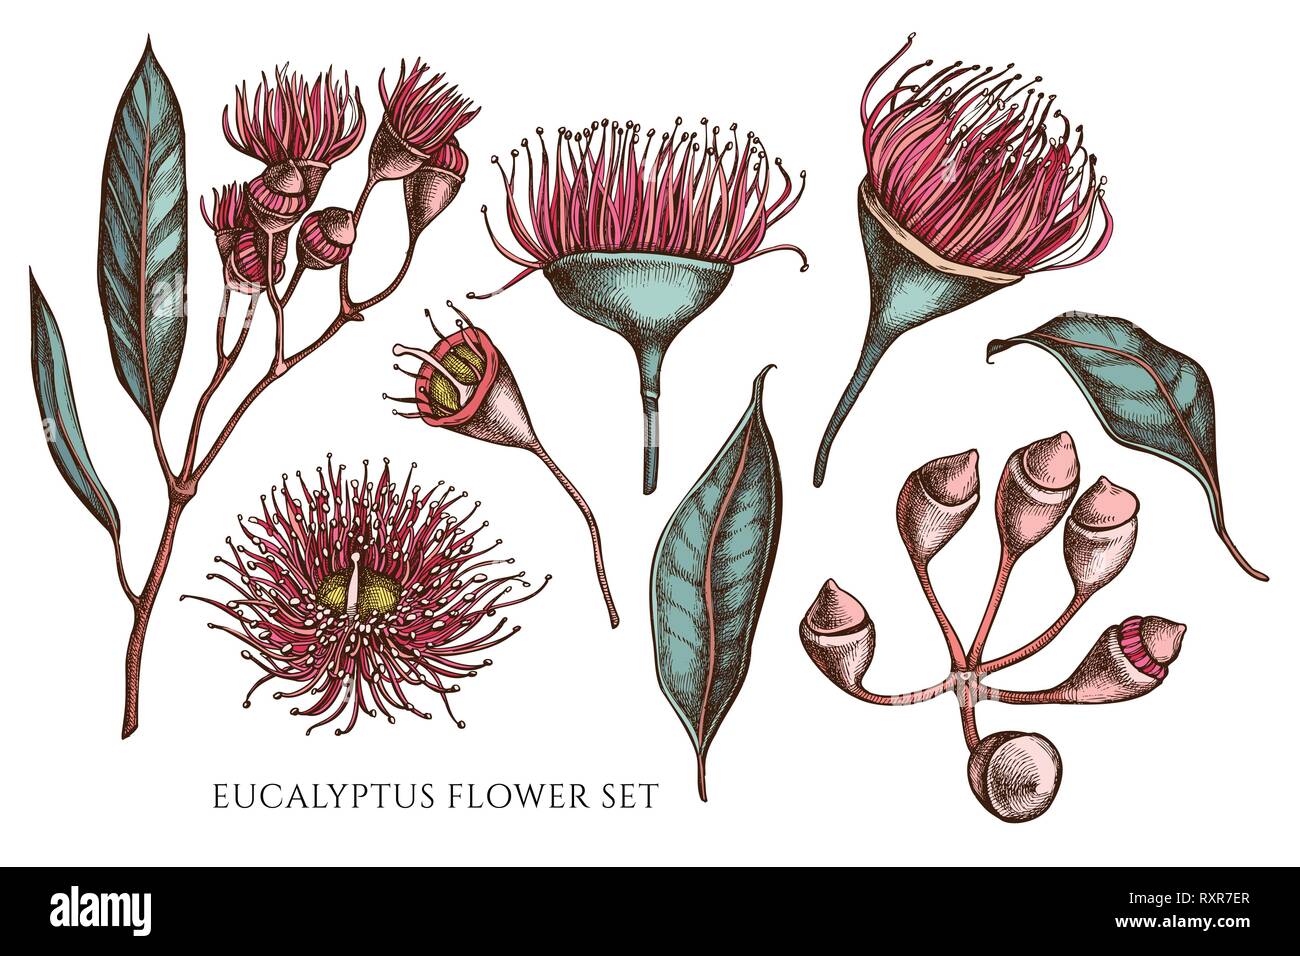 Vector collection of hand drawn colored  eucalyptus flower stock illustration Stock Vector